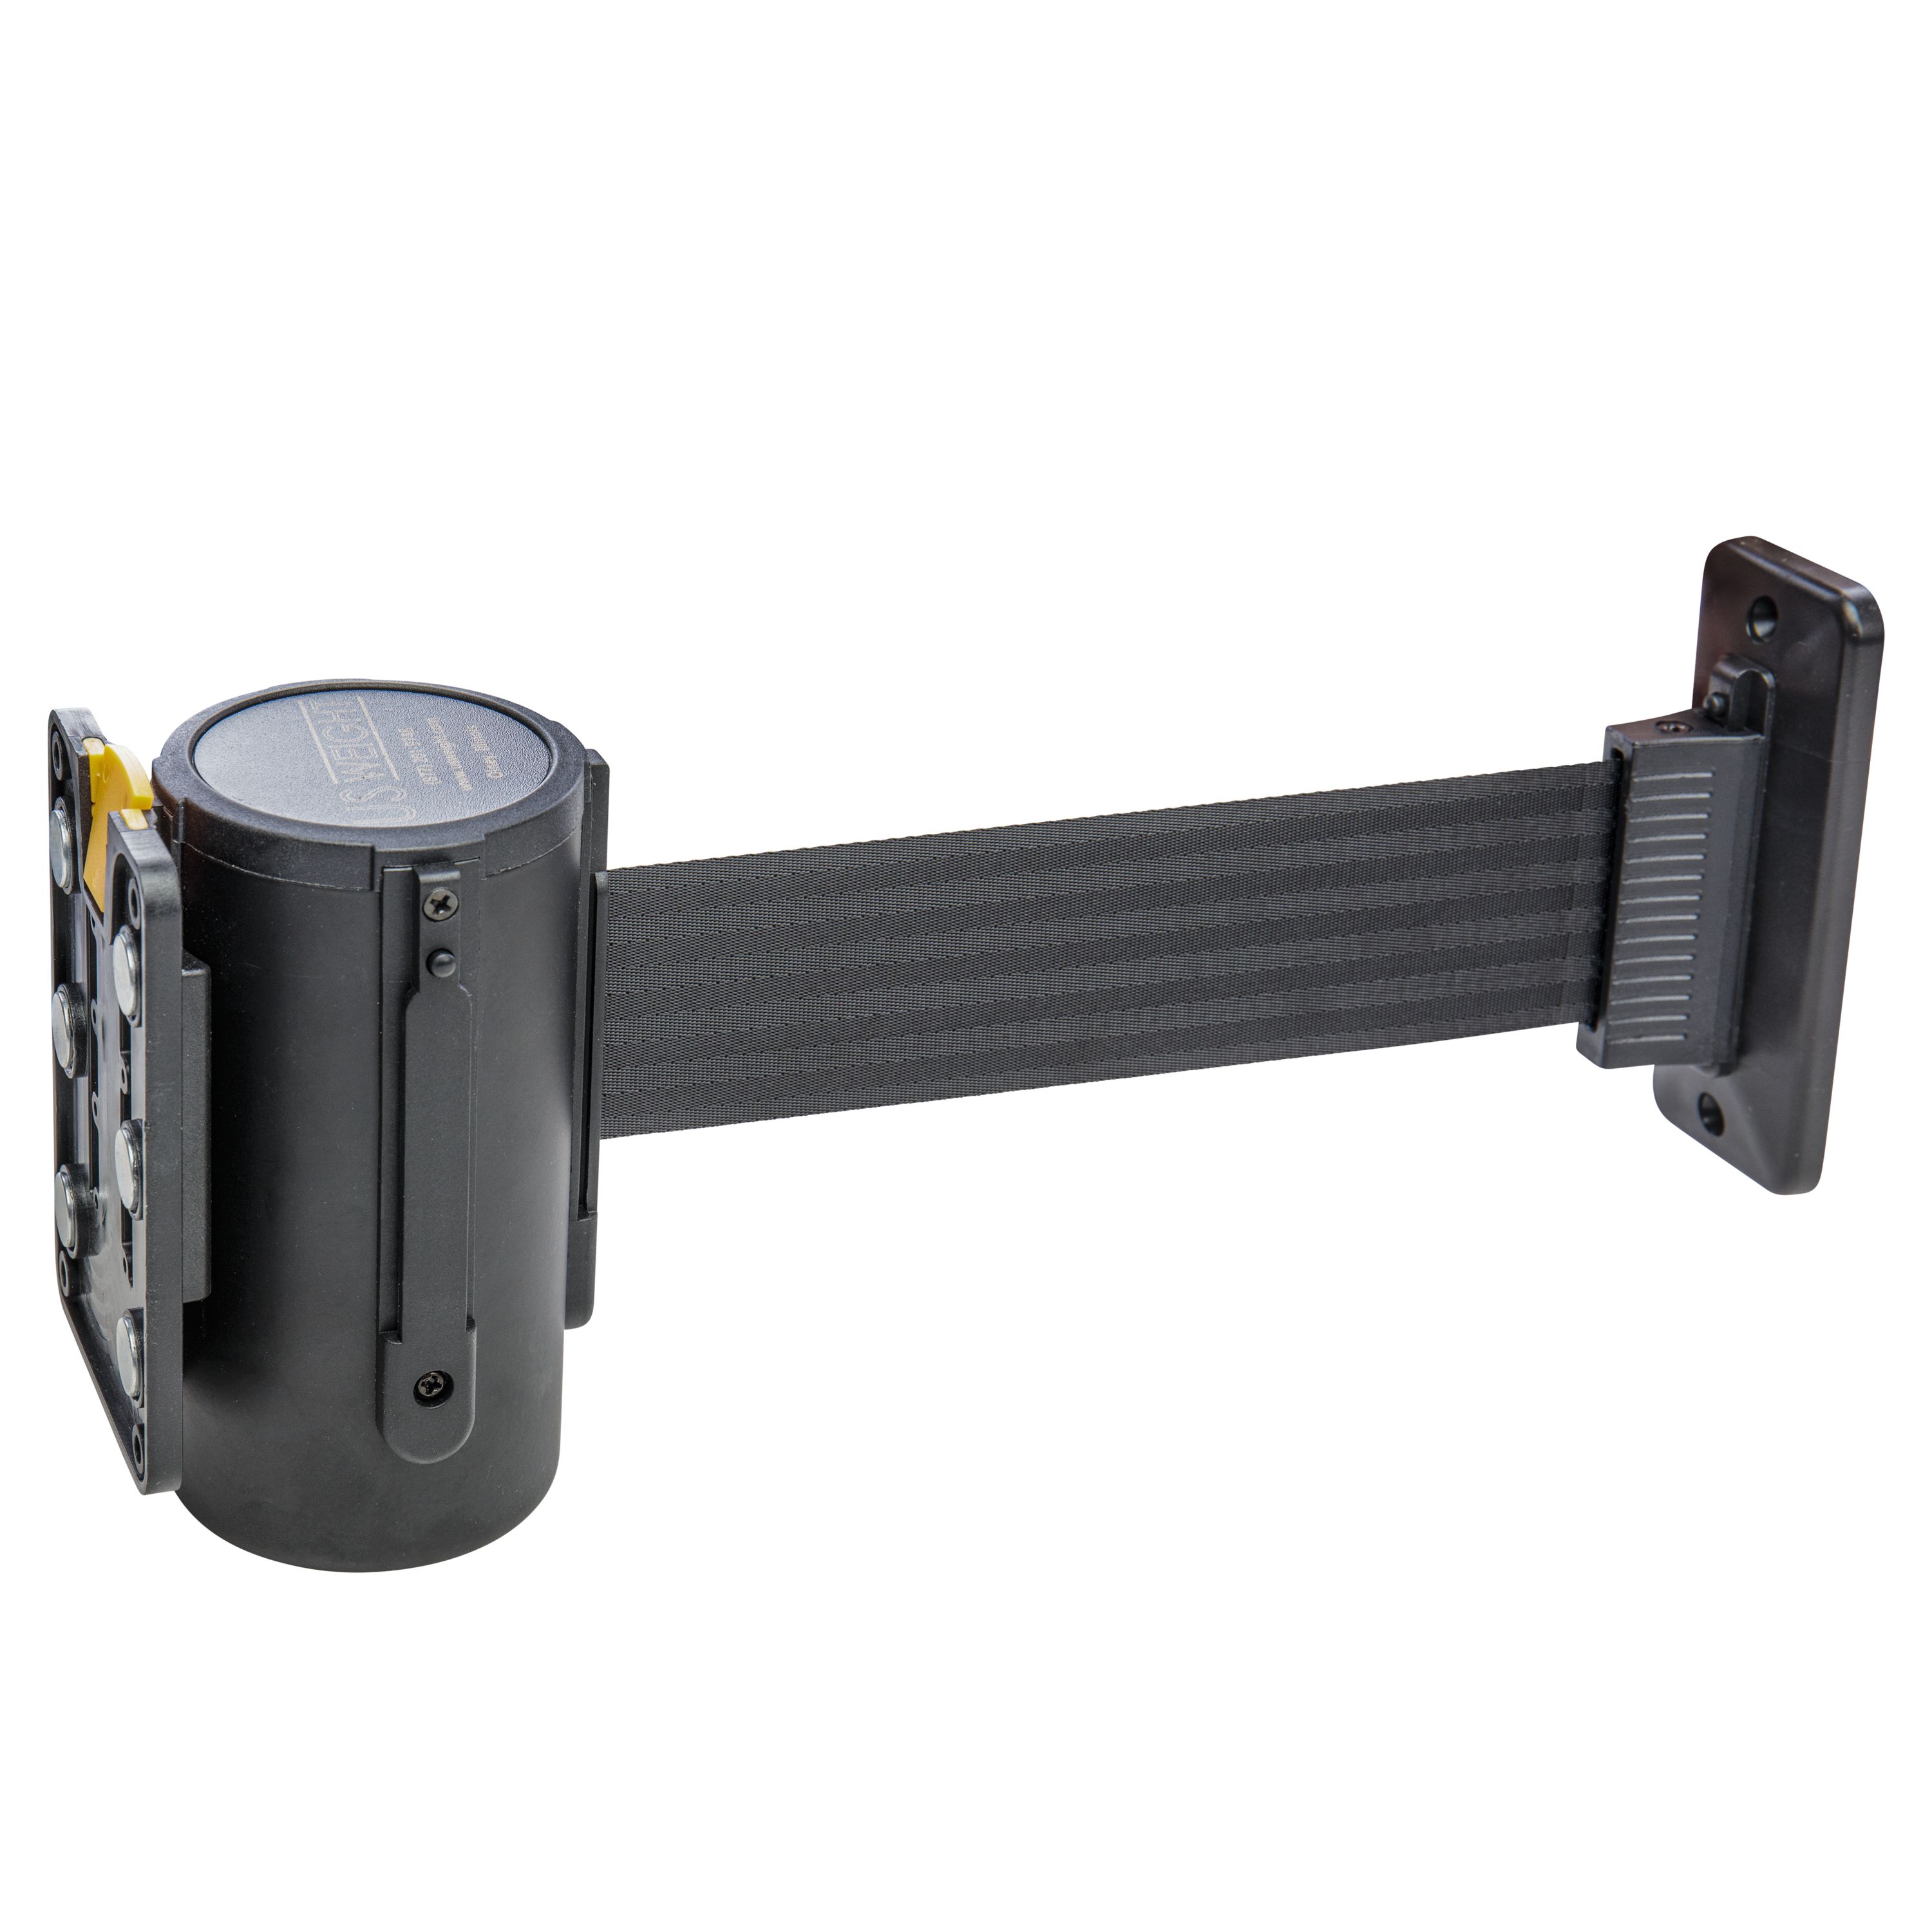 US Weight U2500 Crowd Control Wall Mount with 8' Black Retractable Belt with Safe Braking System and Locking Button